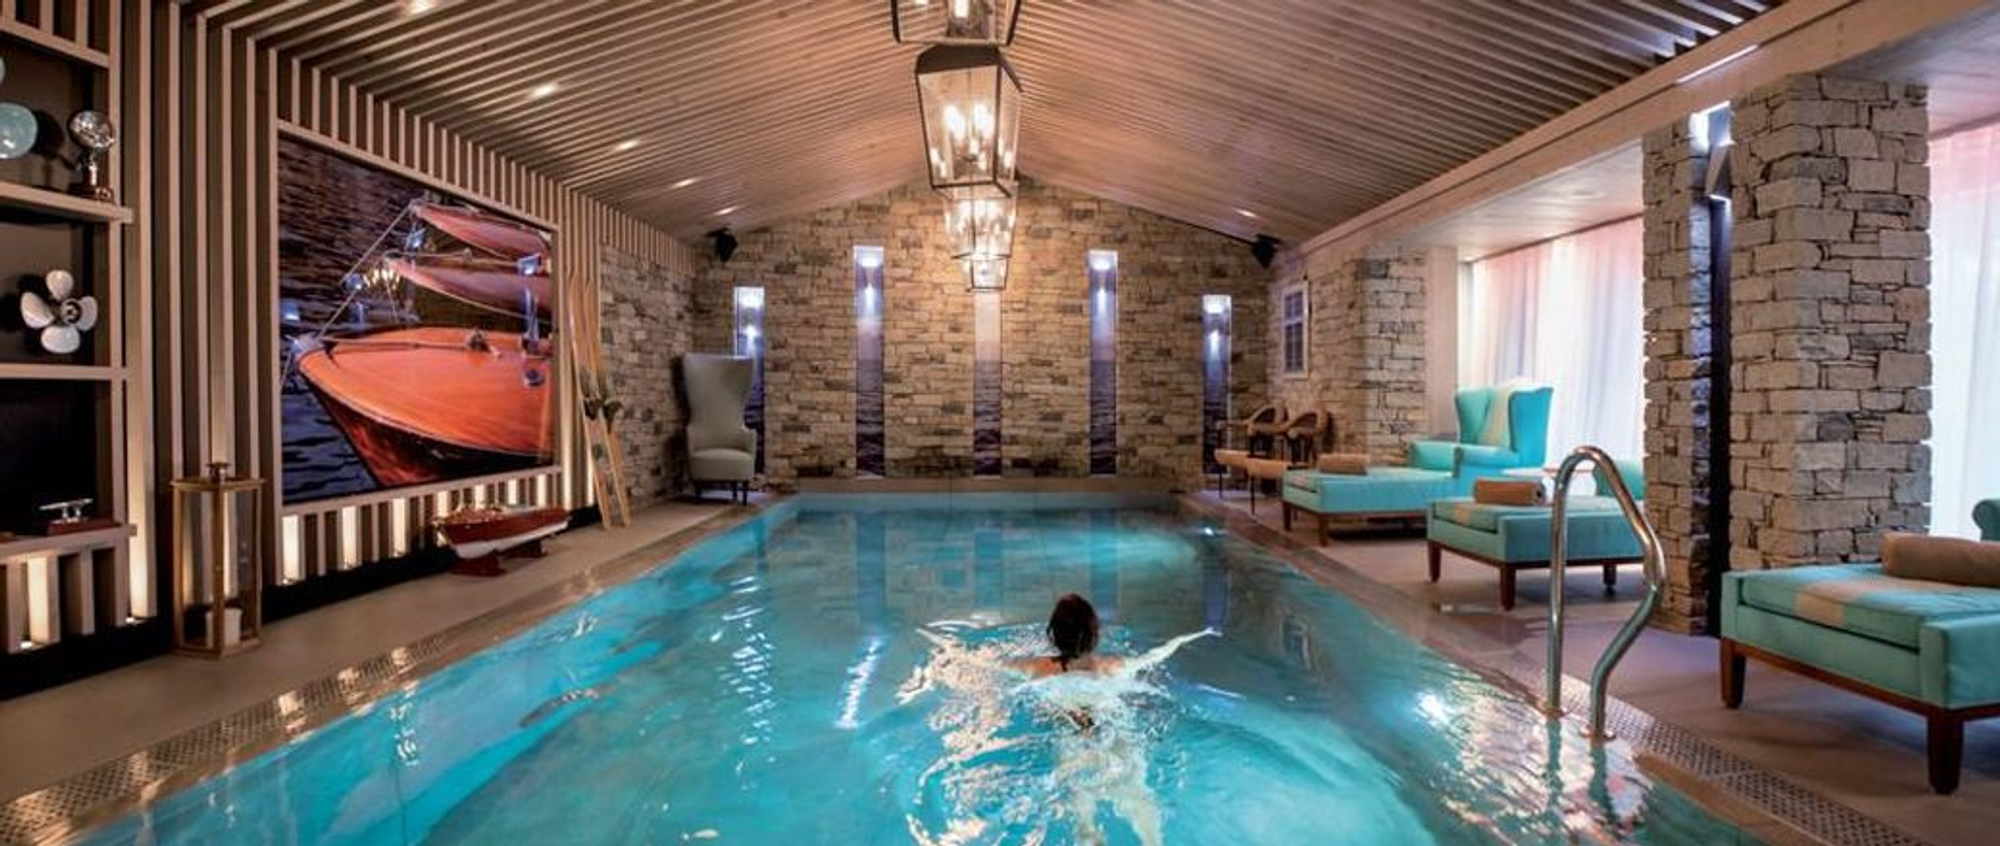 Spa & pool in the Alps